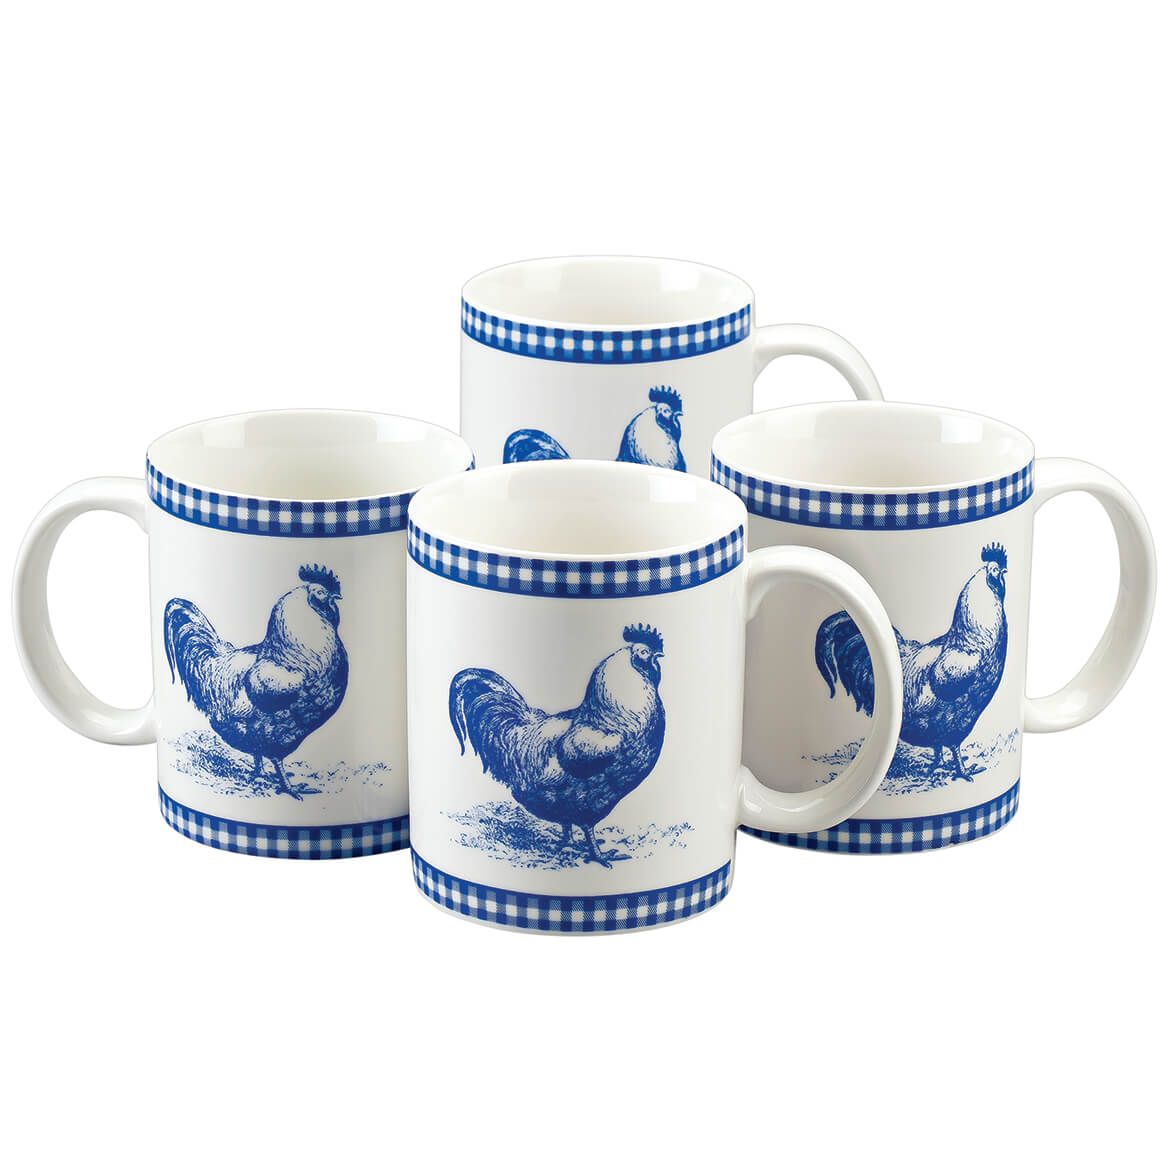 Blue Rooster Mugs, Set of 4 by William Roberts + '-' + 369665